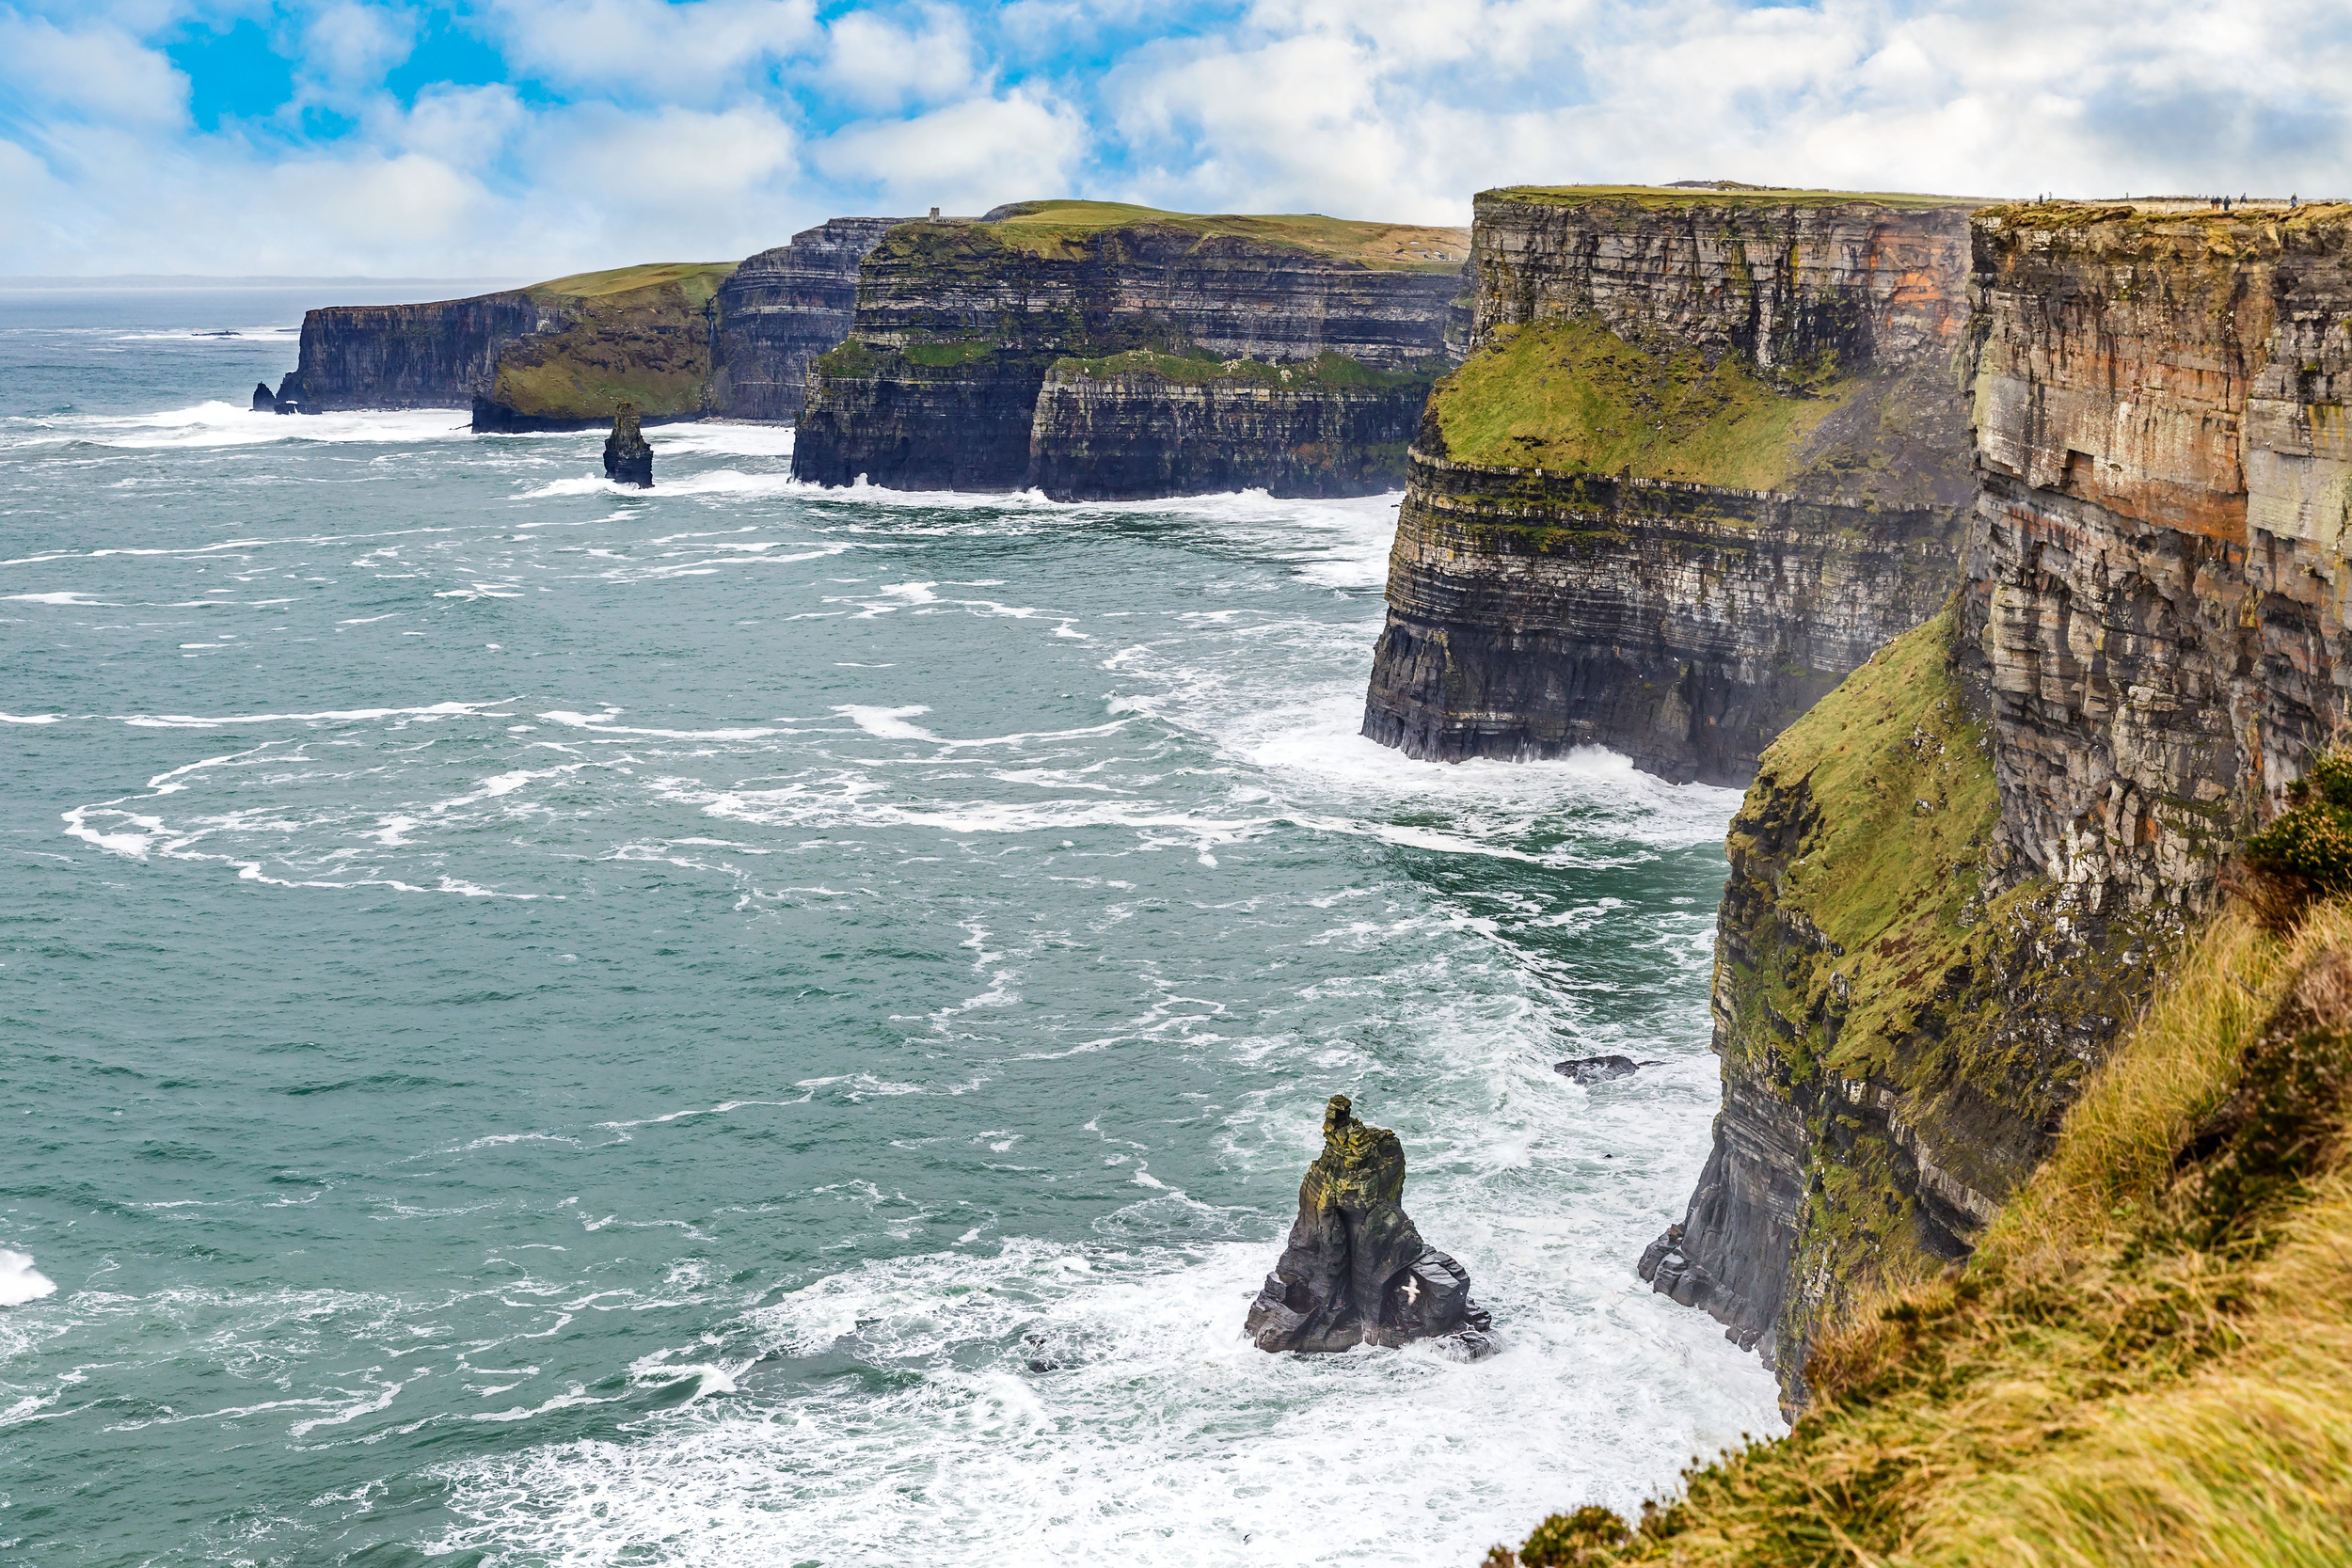 <p>Admittedly a bit far as a day trip from Dublin, but if you can swing it, you won’t regret the decision. The straight-down bright green cliffs are a great viewpoint for Galway Bay and the Aran Islands. You’ll get plenty of exercise on the walk to make the long drive worth it!</p><p>You may also like: <a href='https://www.yardbarker.com/lifestyle/articles/add_these_20_unusual_us_destinations_to_your_travel_bucket_list_121723/s1__39105967'>Add these 20 unusual U.S. destinations to your travel bucket list</a></p>